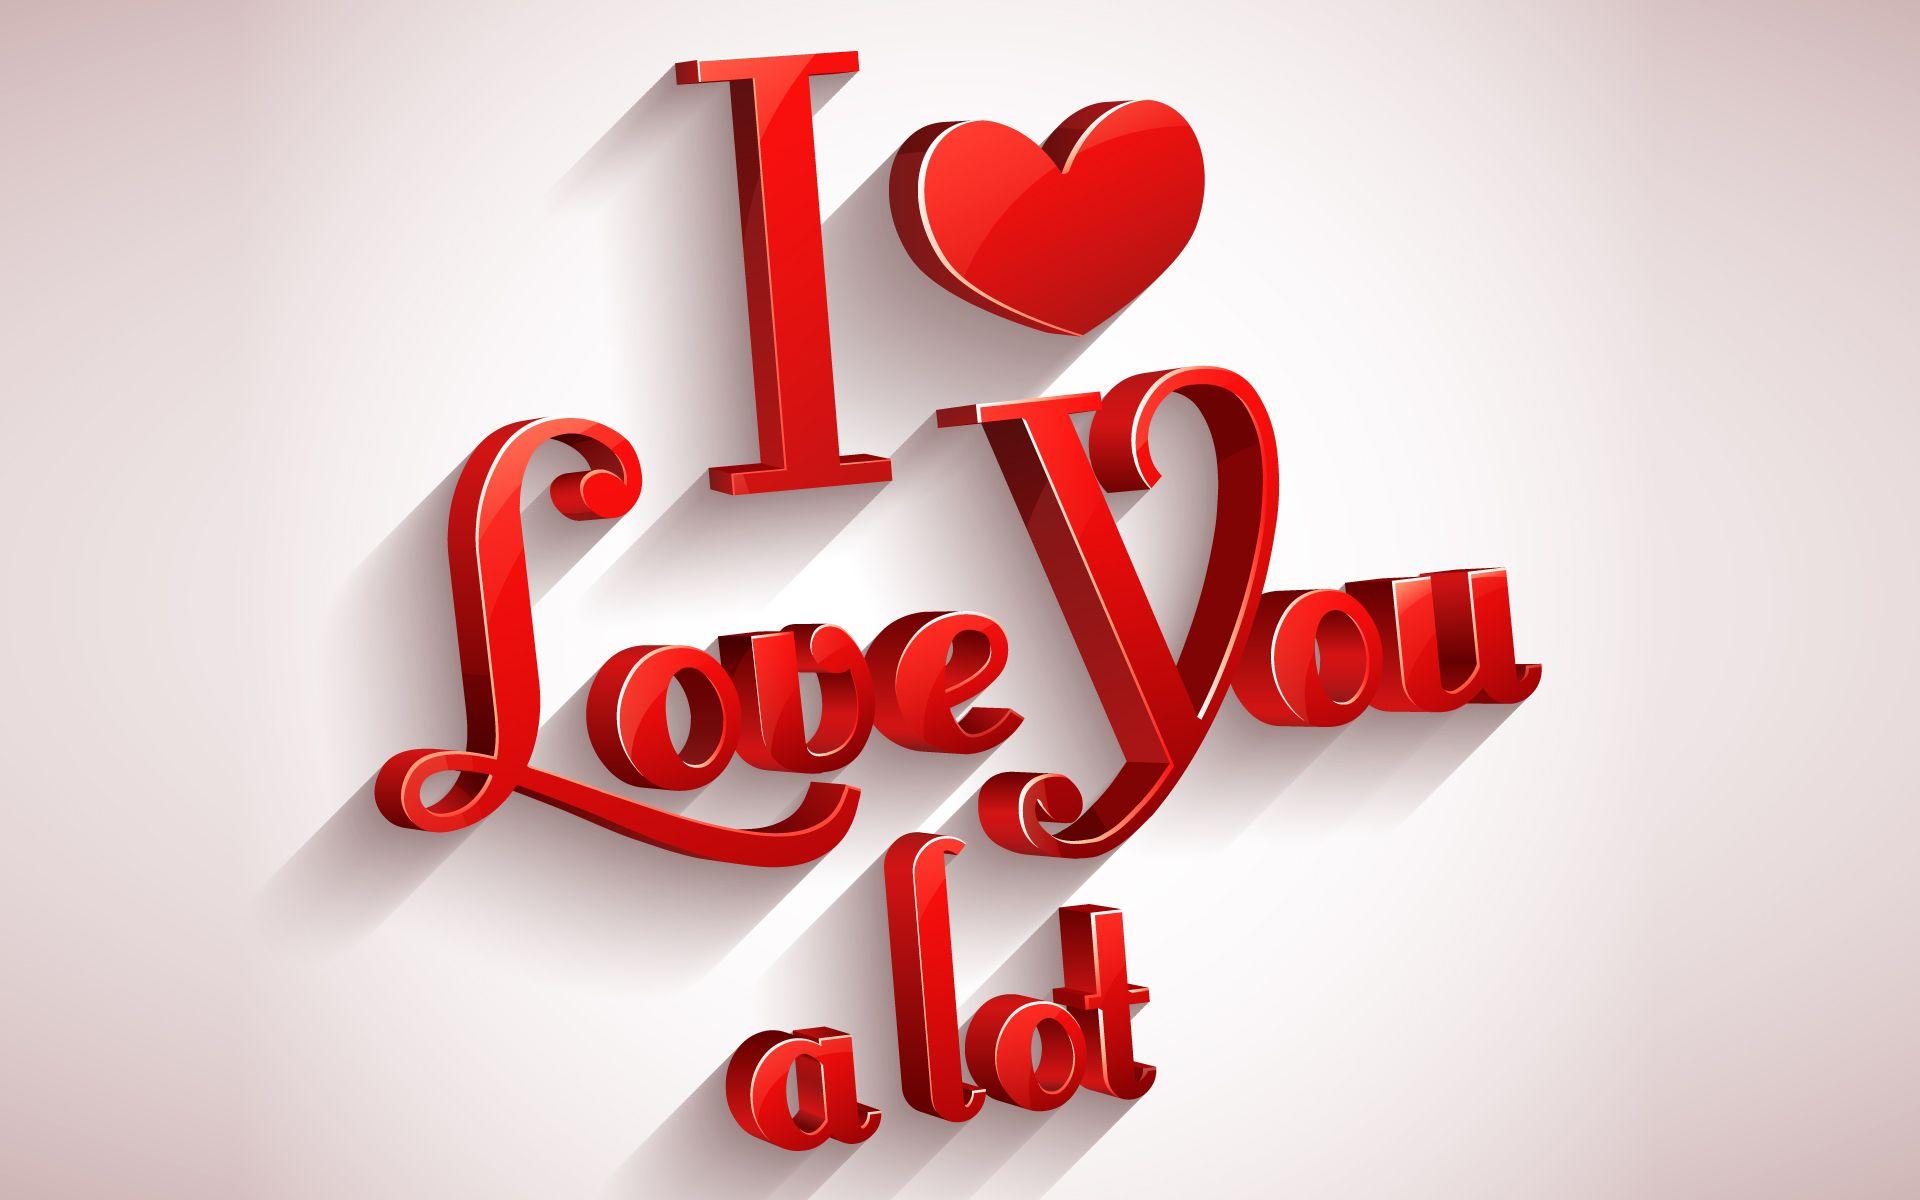 I Love You Wallpapers Top Free I Love You Backgrounds Wallpaperaccess Enjoy and share your favorite beautiful hd wallpapers and background images. i love you wallpapers top free i love